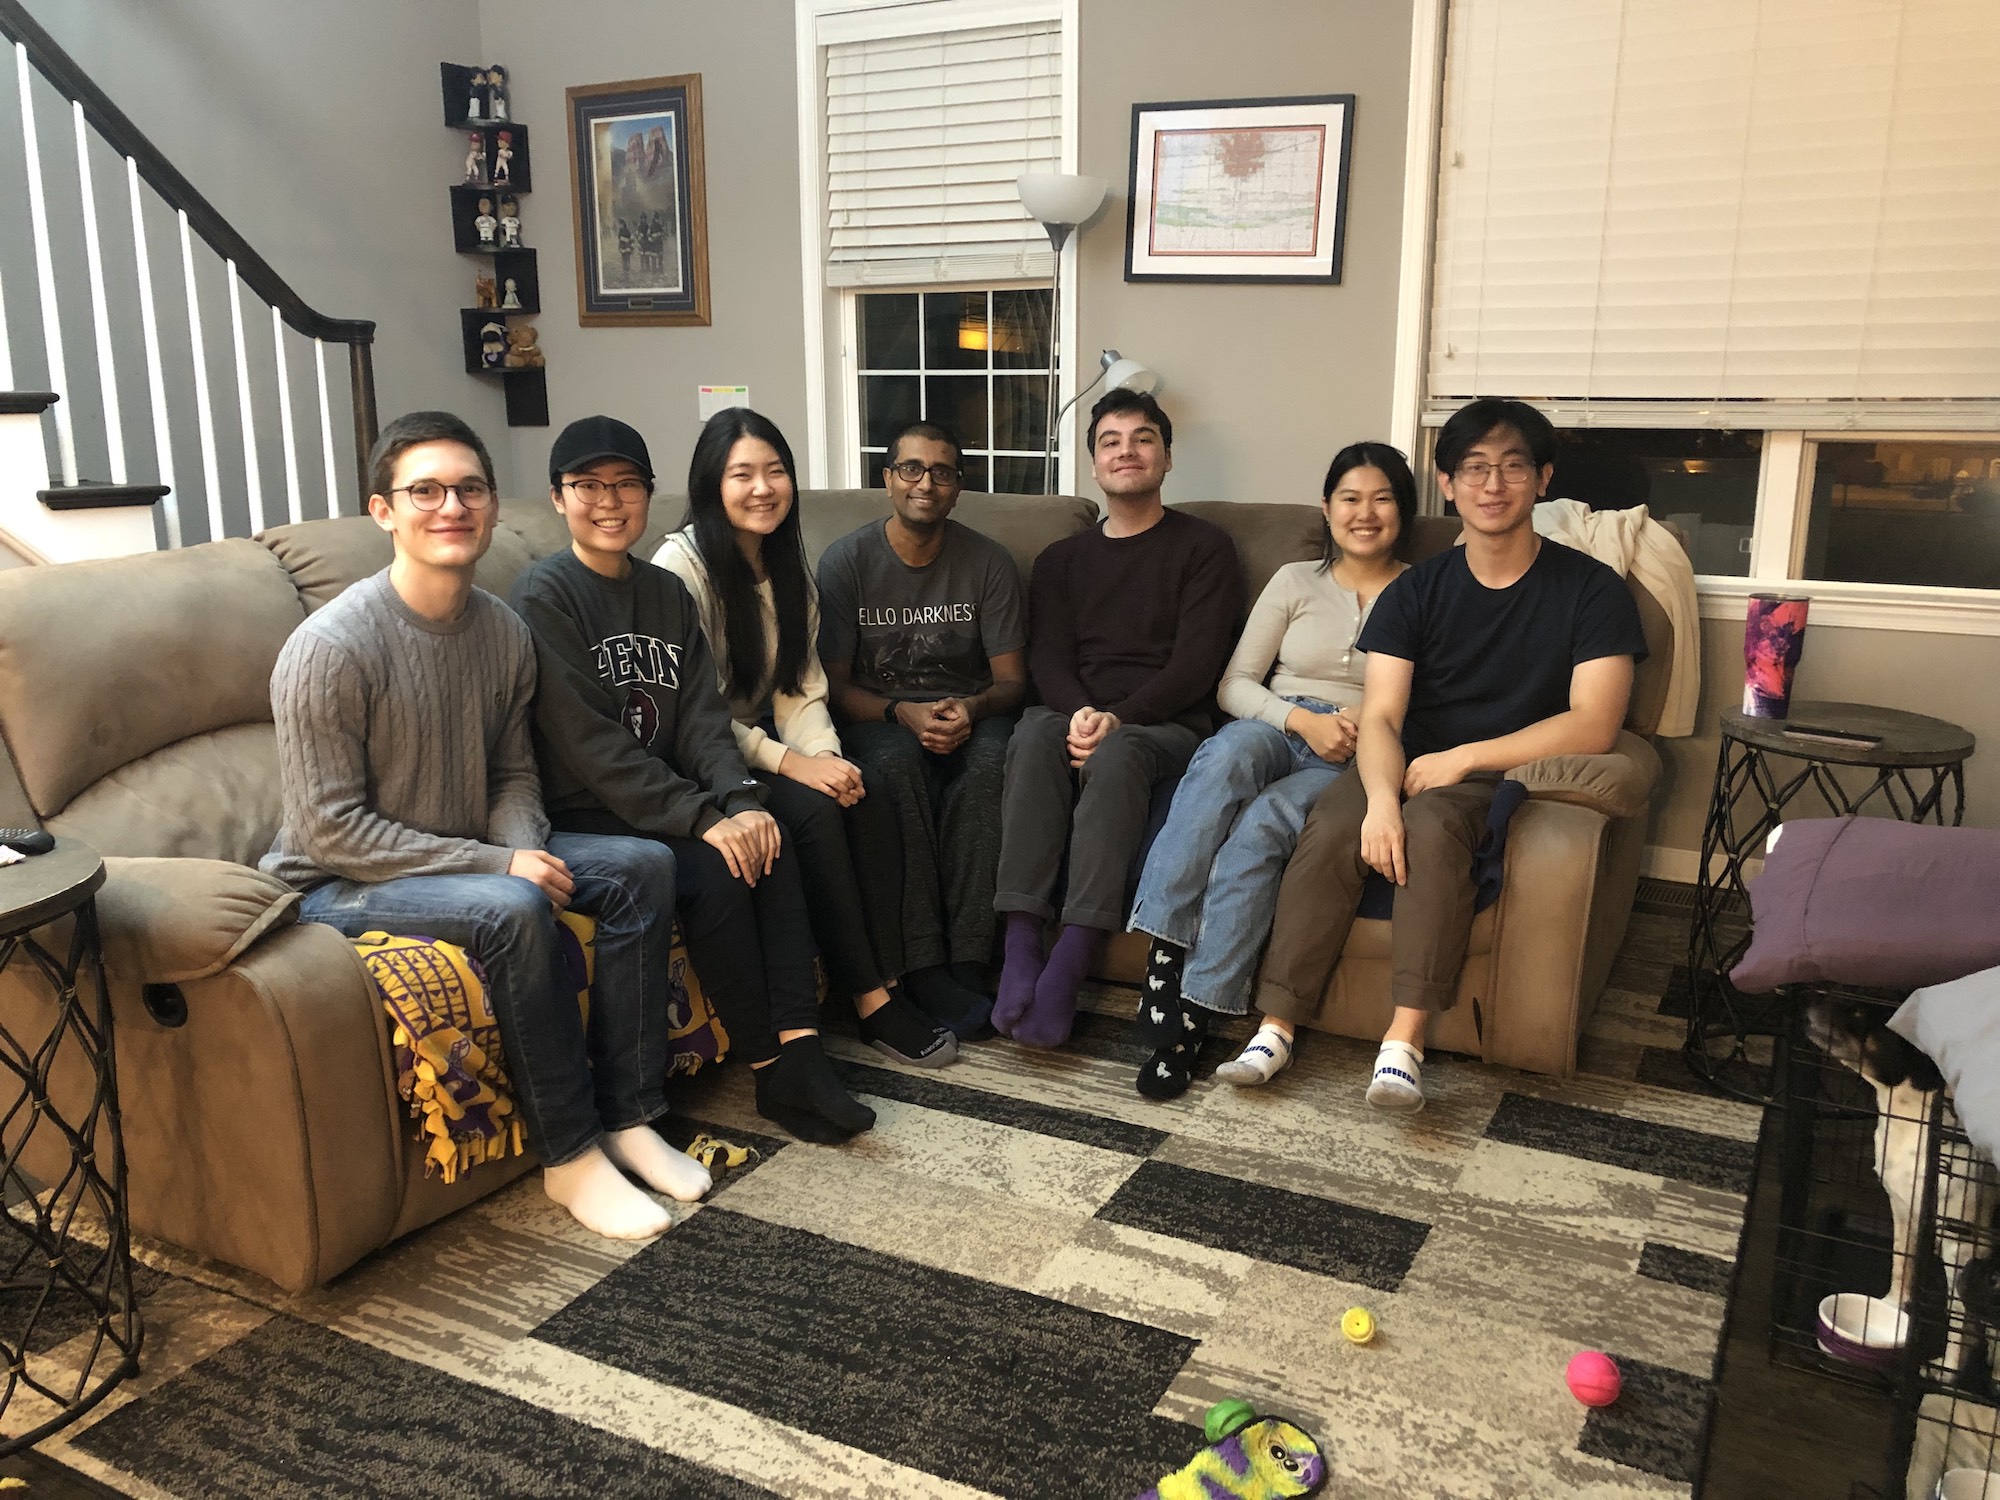 People pose on a couch after Thanksgiving dinner.